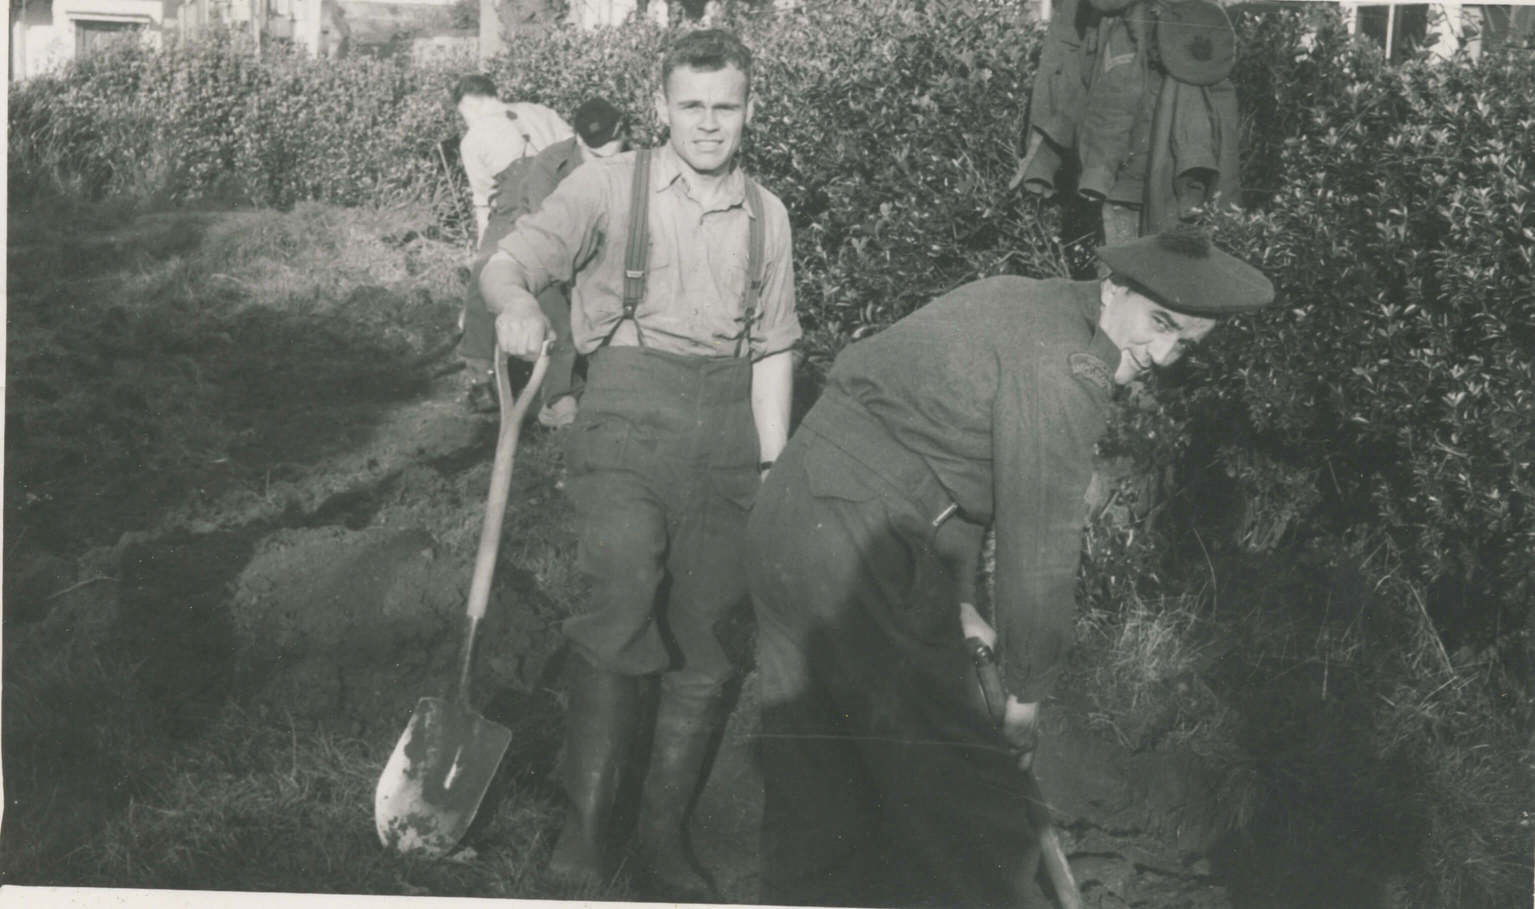 English Coast (December 17th 1941)
Taken by Capt. Freele M.O.
George Marie & myself, digging trenches near our house, for our bomb shelters. Albert Schmidt with his back to camera.